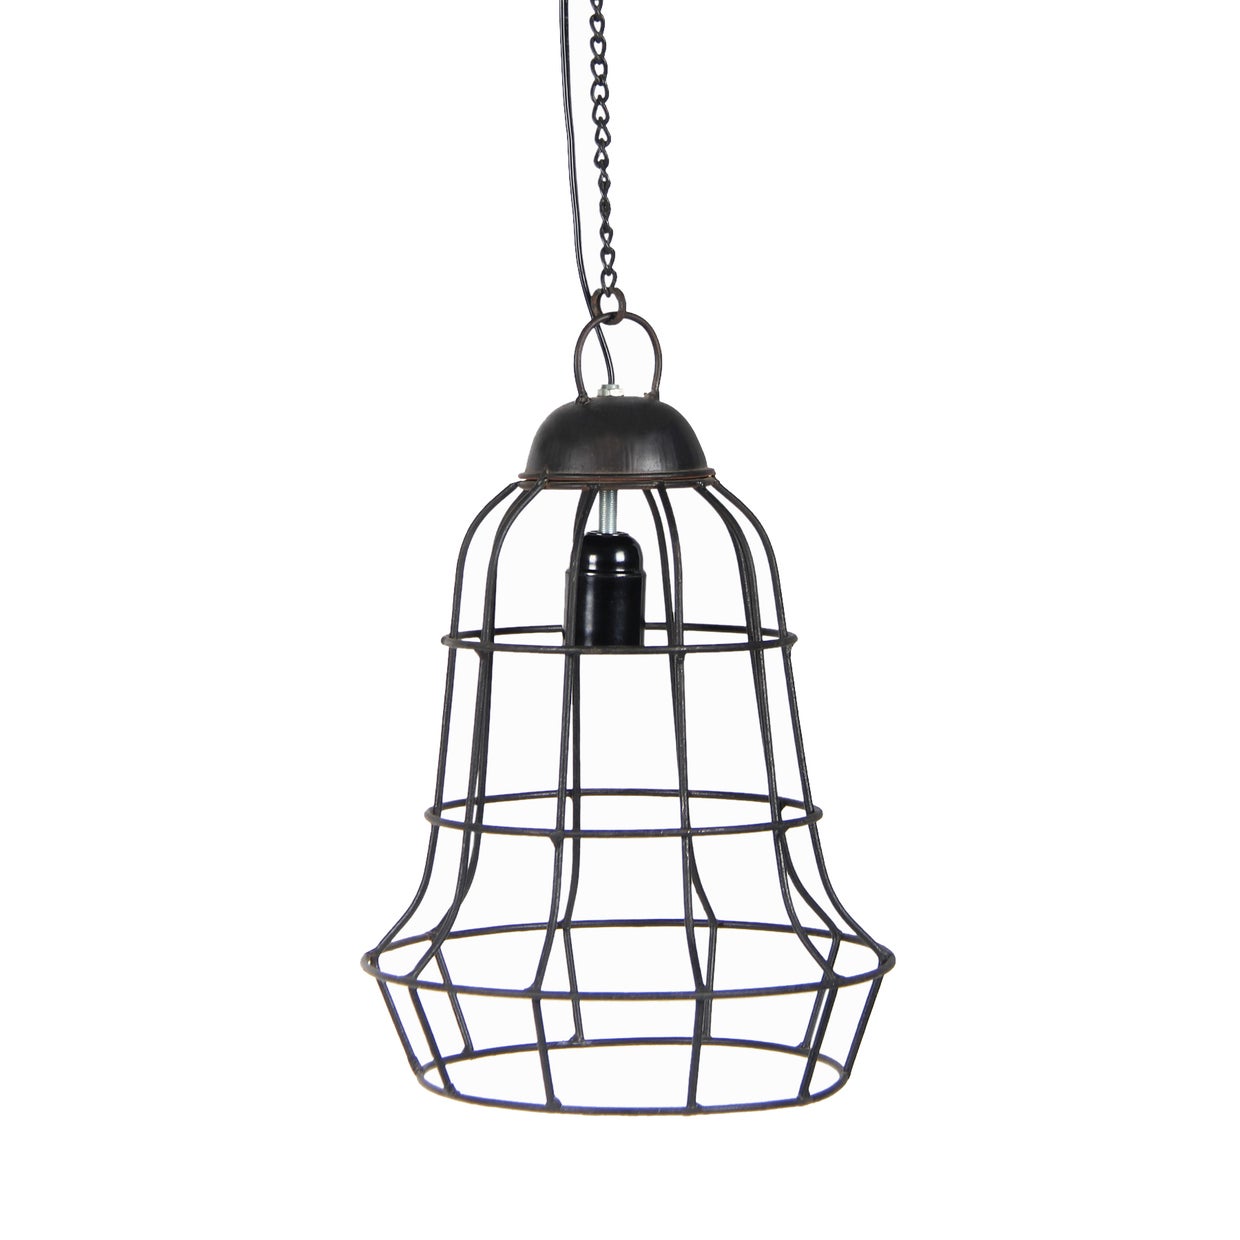 INDUSTRIAL STYLE CAGE HANGING LIGHT AUTUM SPECIAL